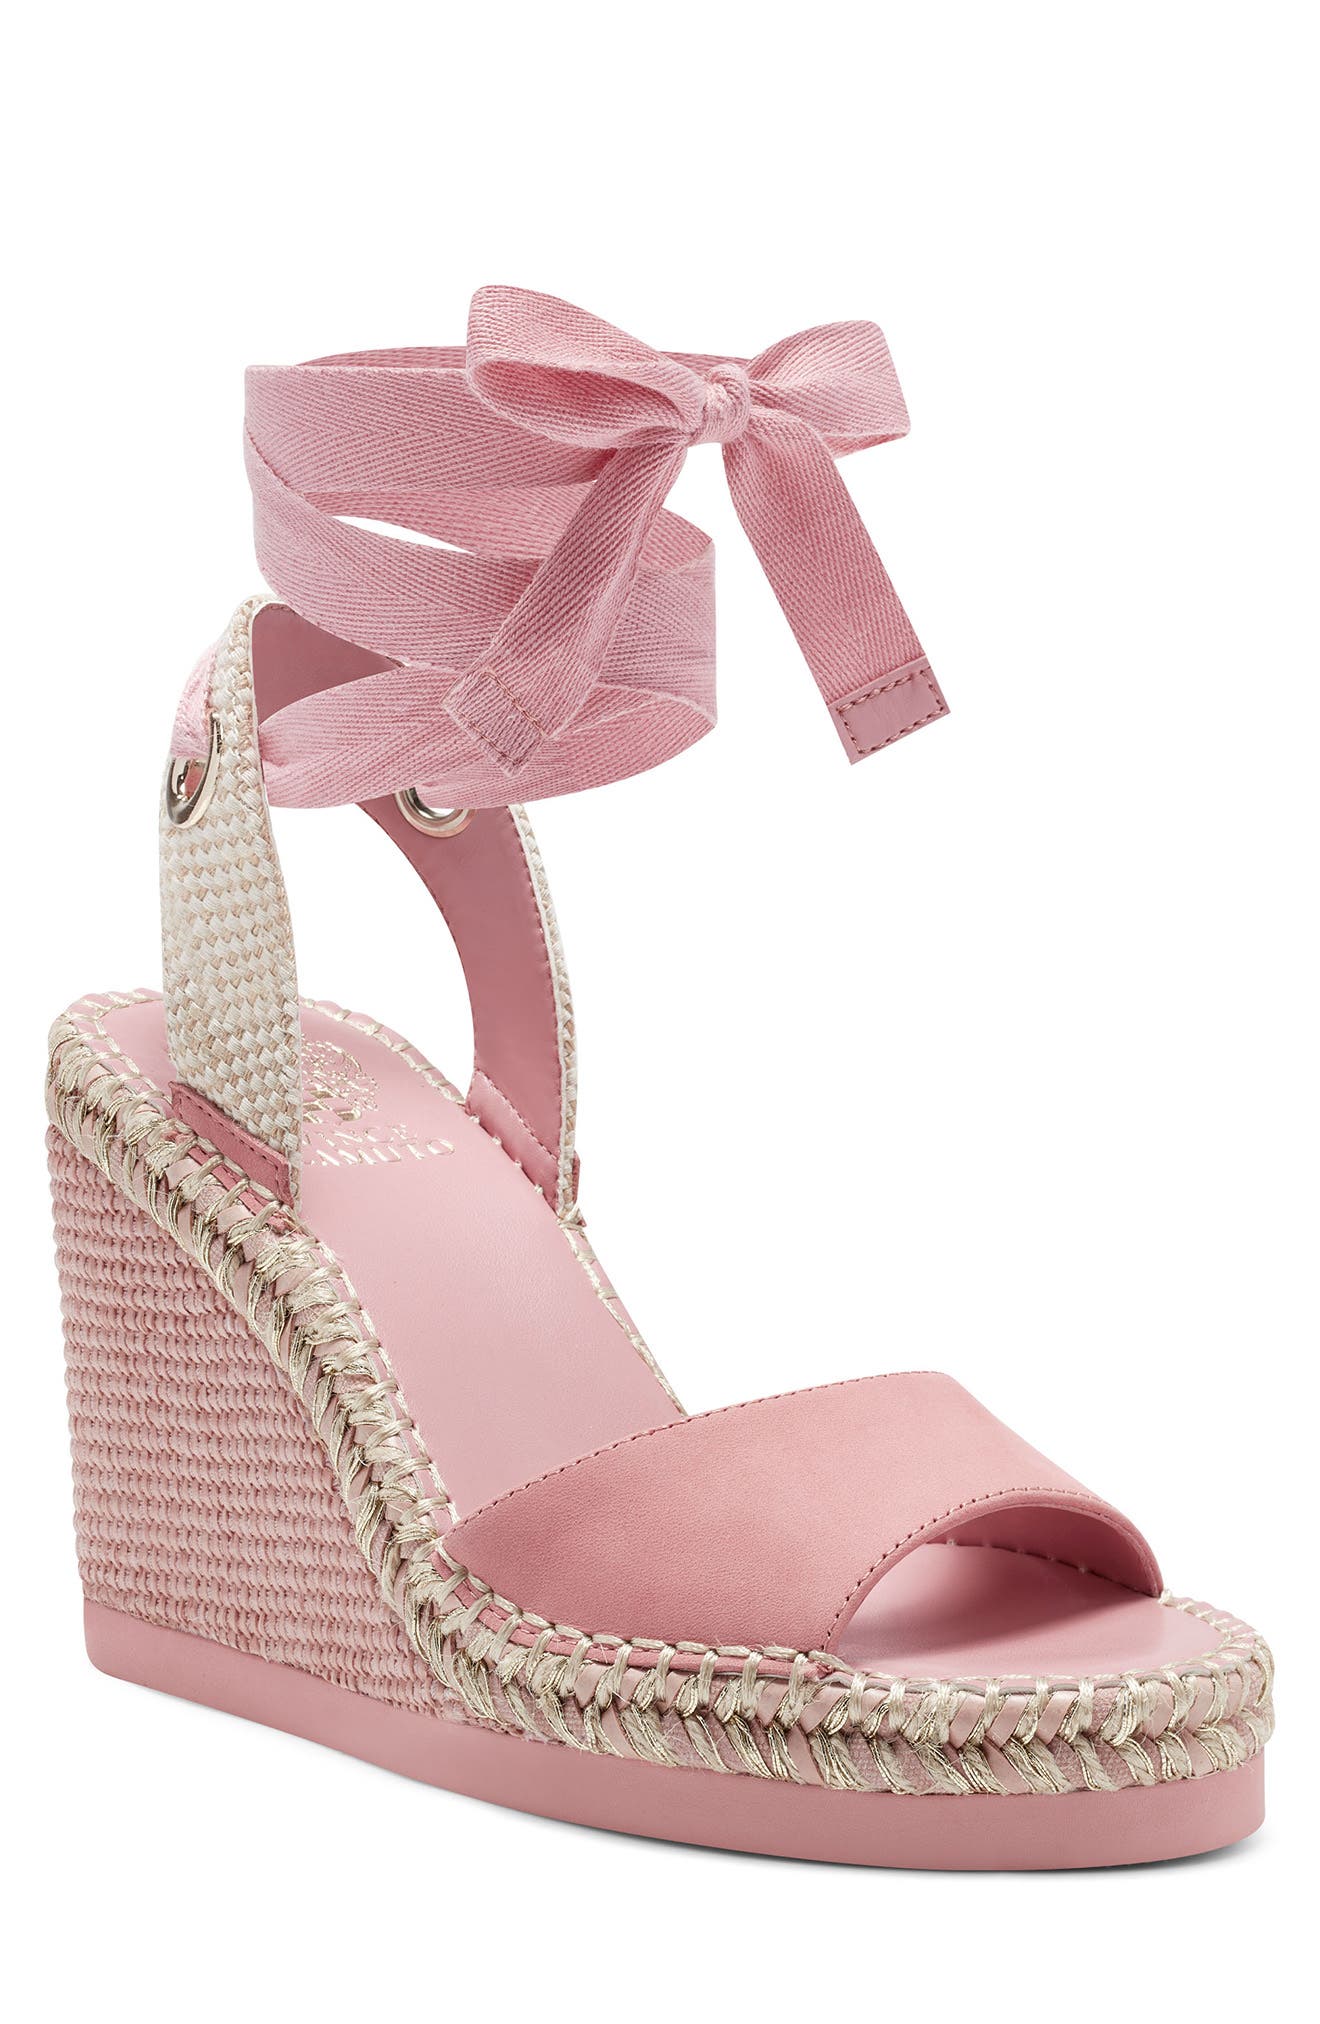 Women’s Pink Ruffle Espadrilles With Ankle Ties Size 8-1/2 